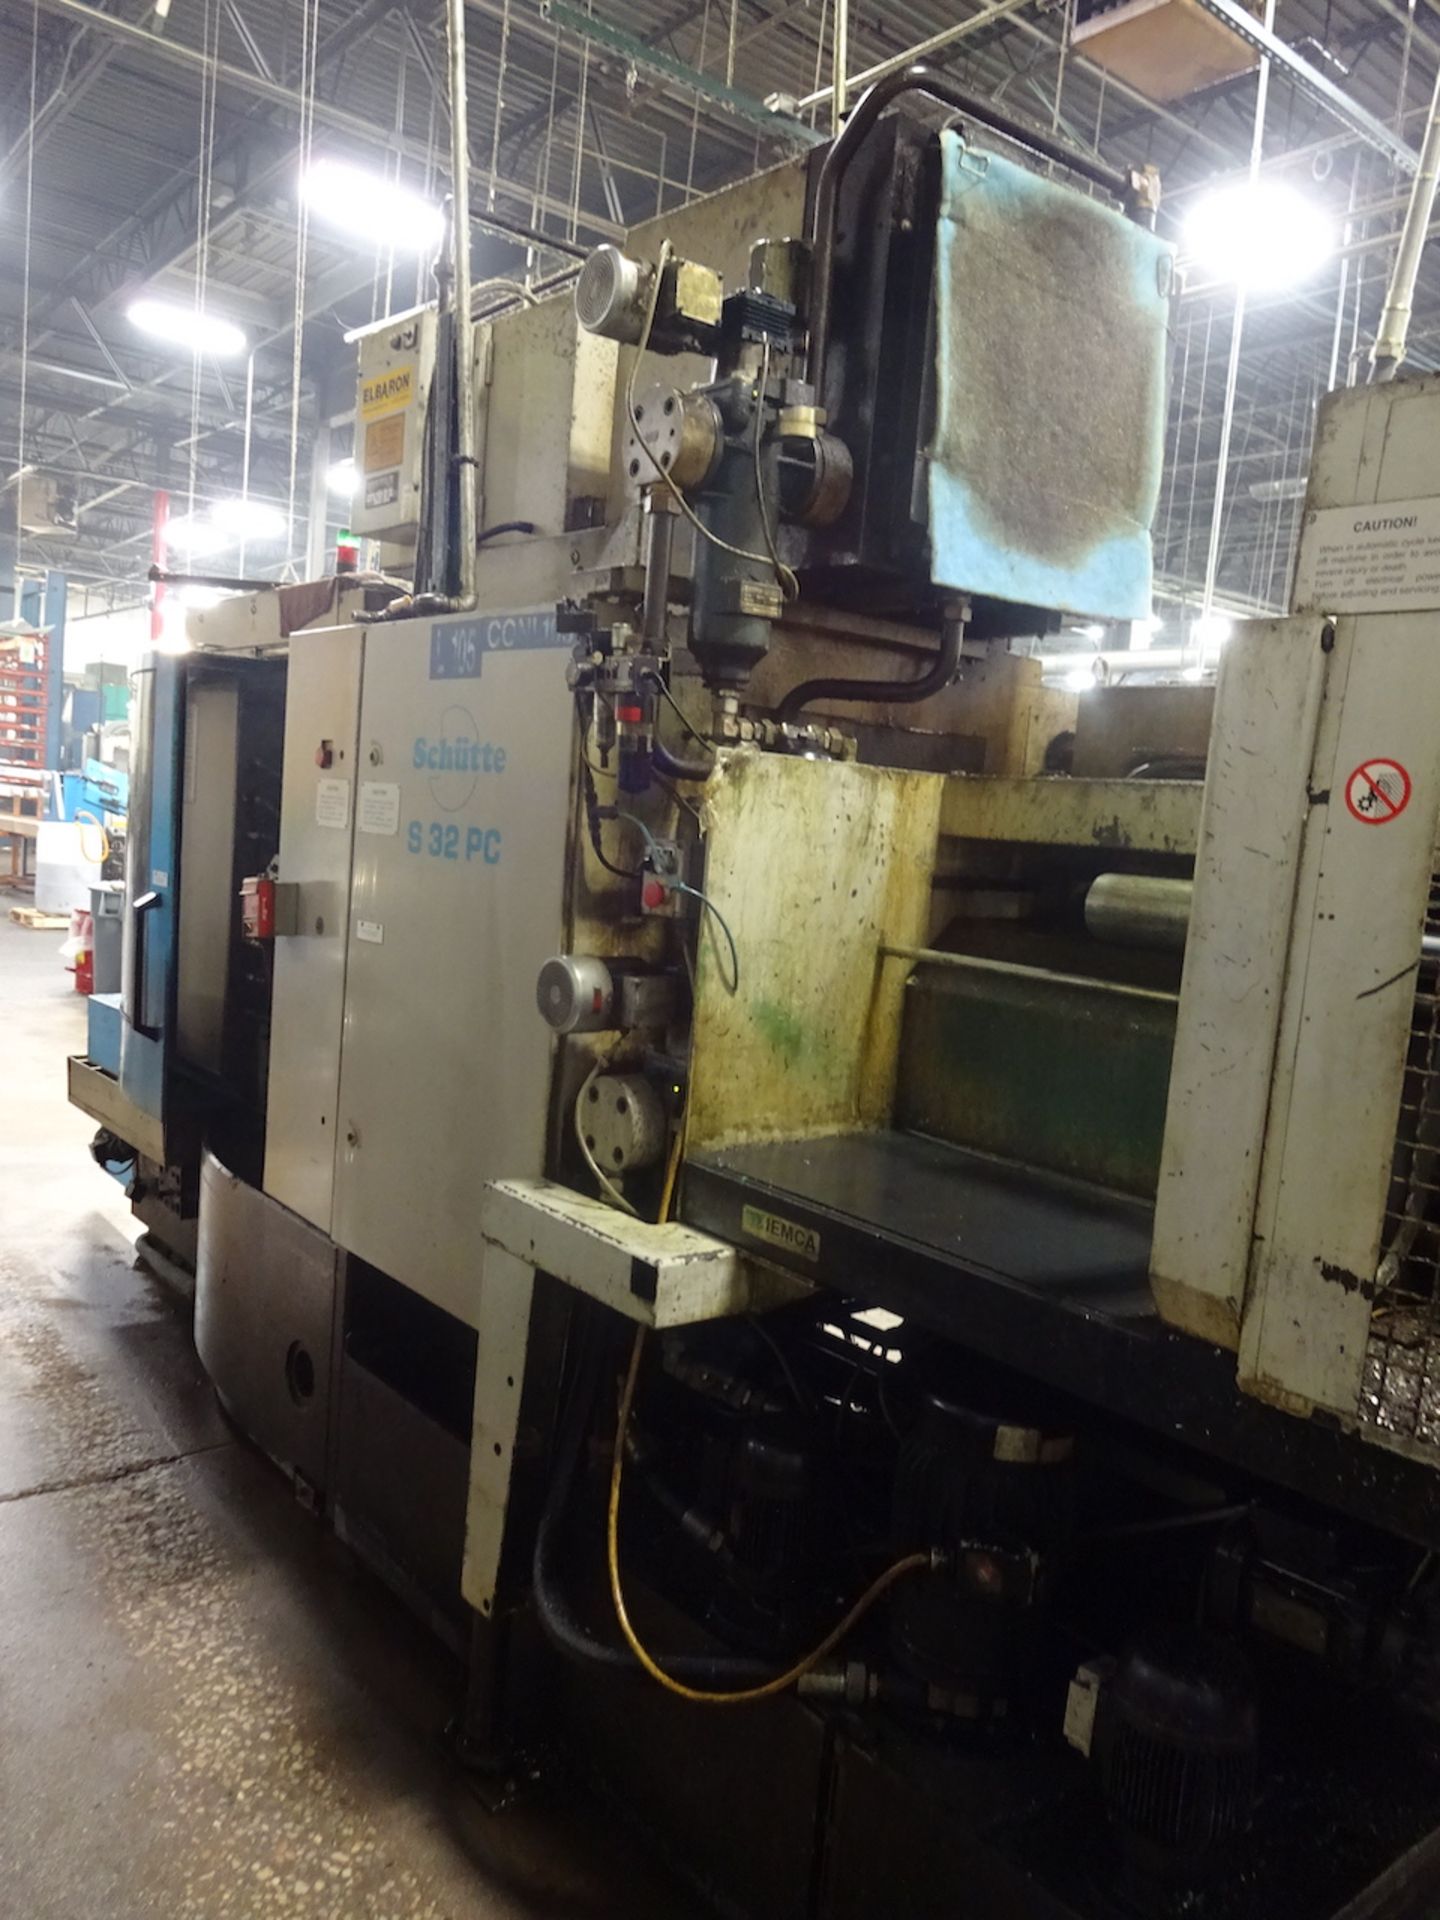 1999 SCHUTTE MODEL S32PC CNC 6-SPINDLE AUTOMATIC SCREW MACHINE, SERIES 05 NO. 10, S/N PE-S32PC-0510, - Image 9 of 10